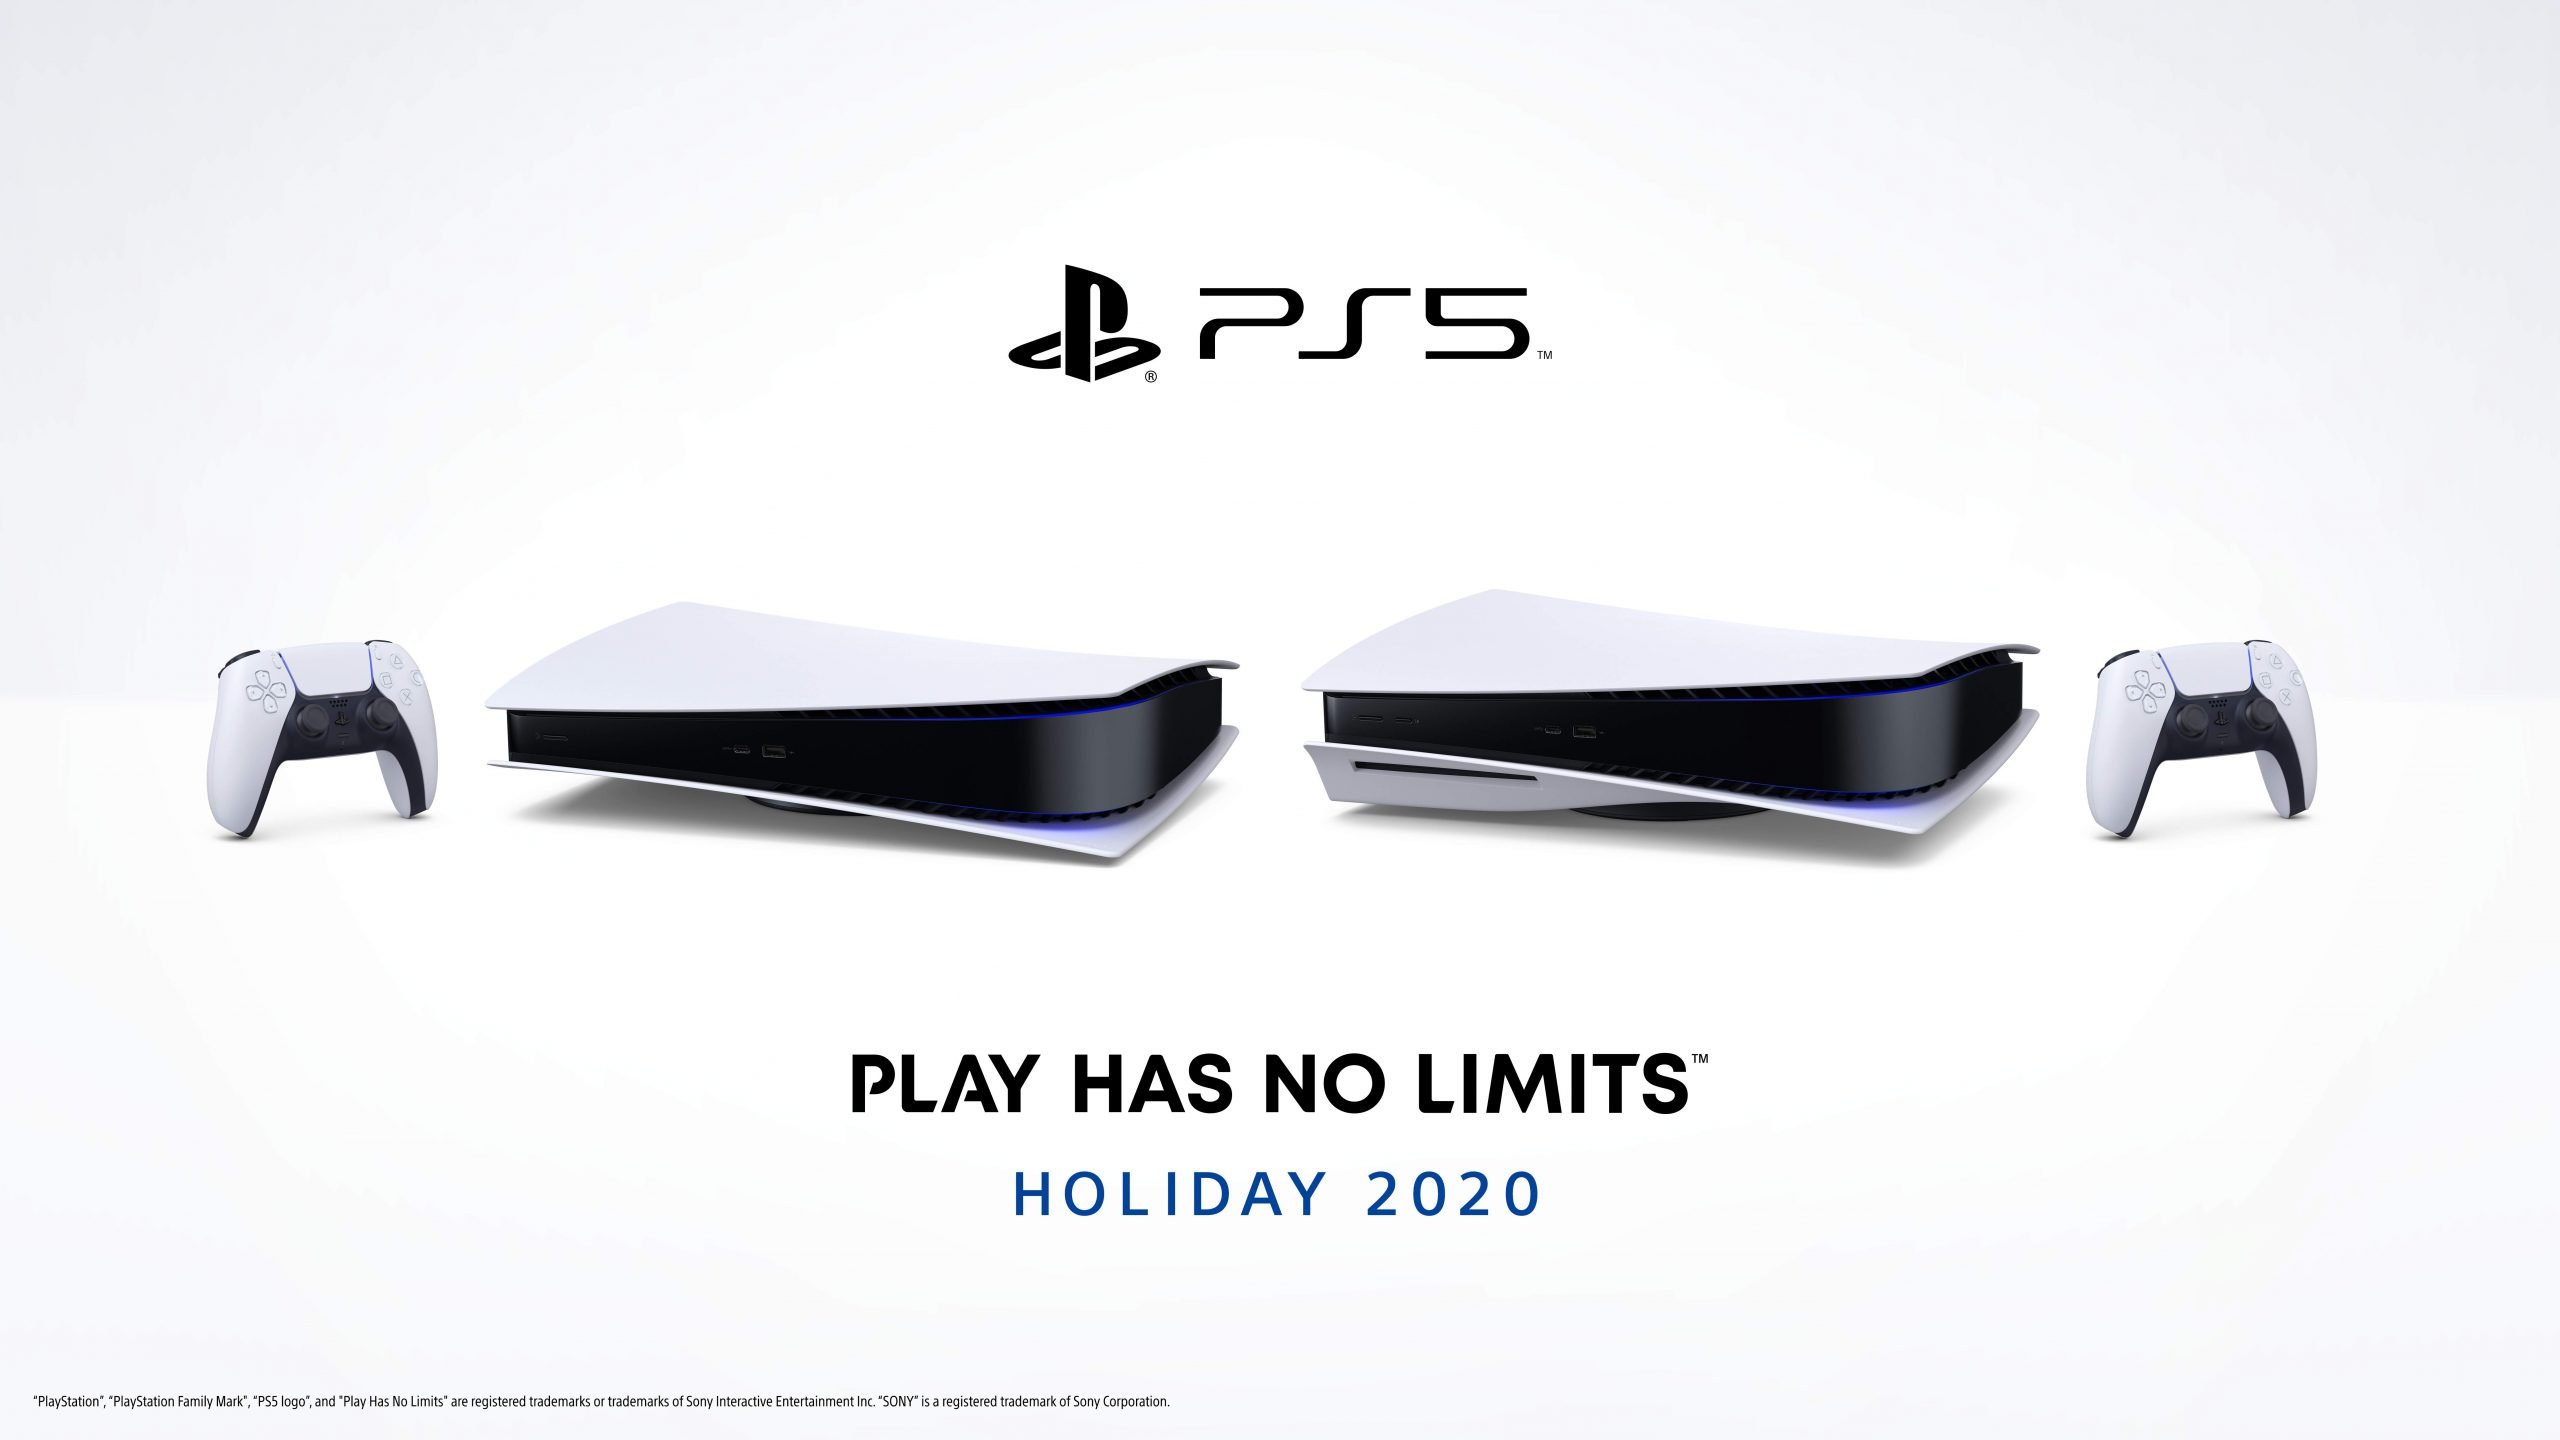 PS5 Comes with Display Stand, Other Box Contents Confirmed - Push Square